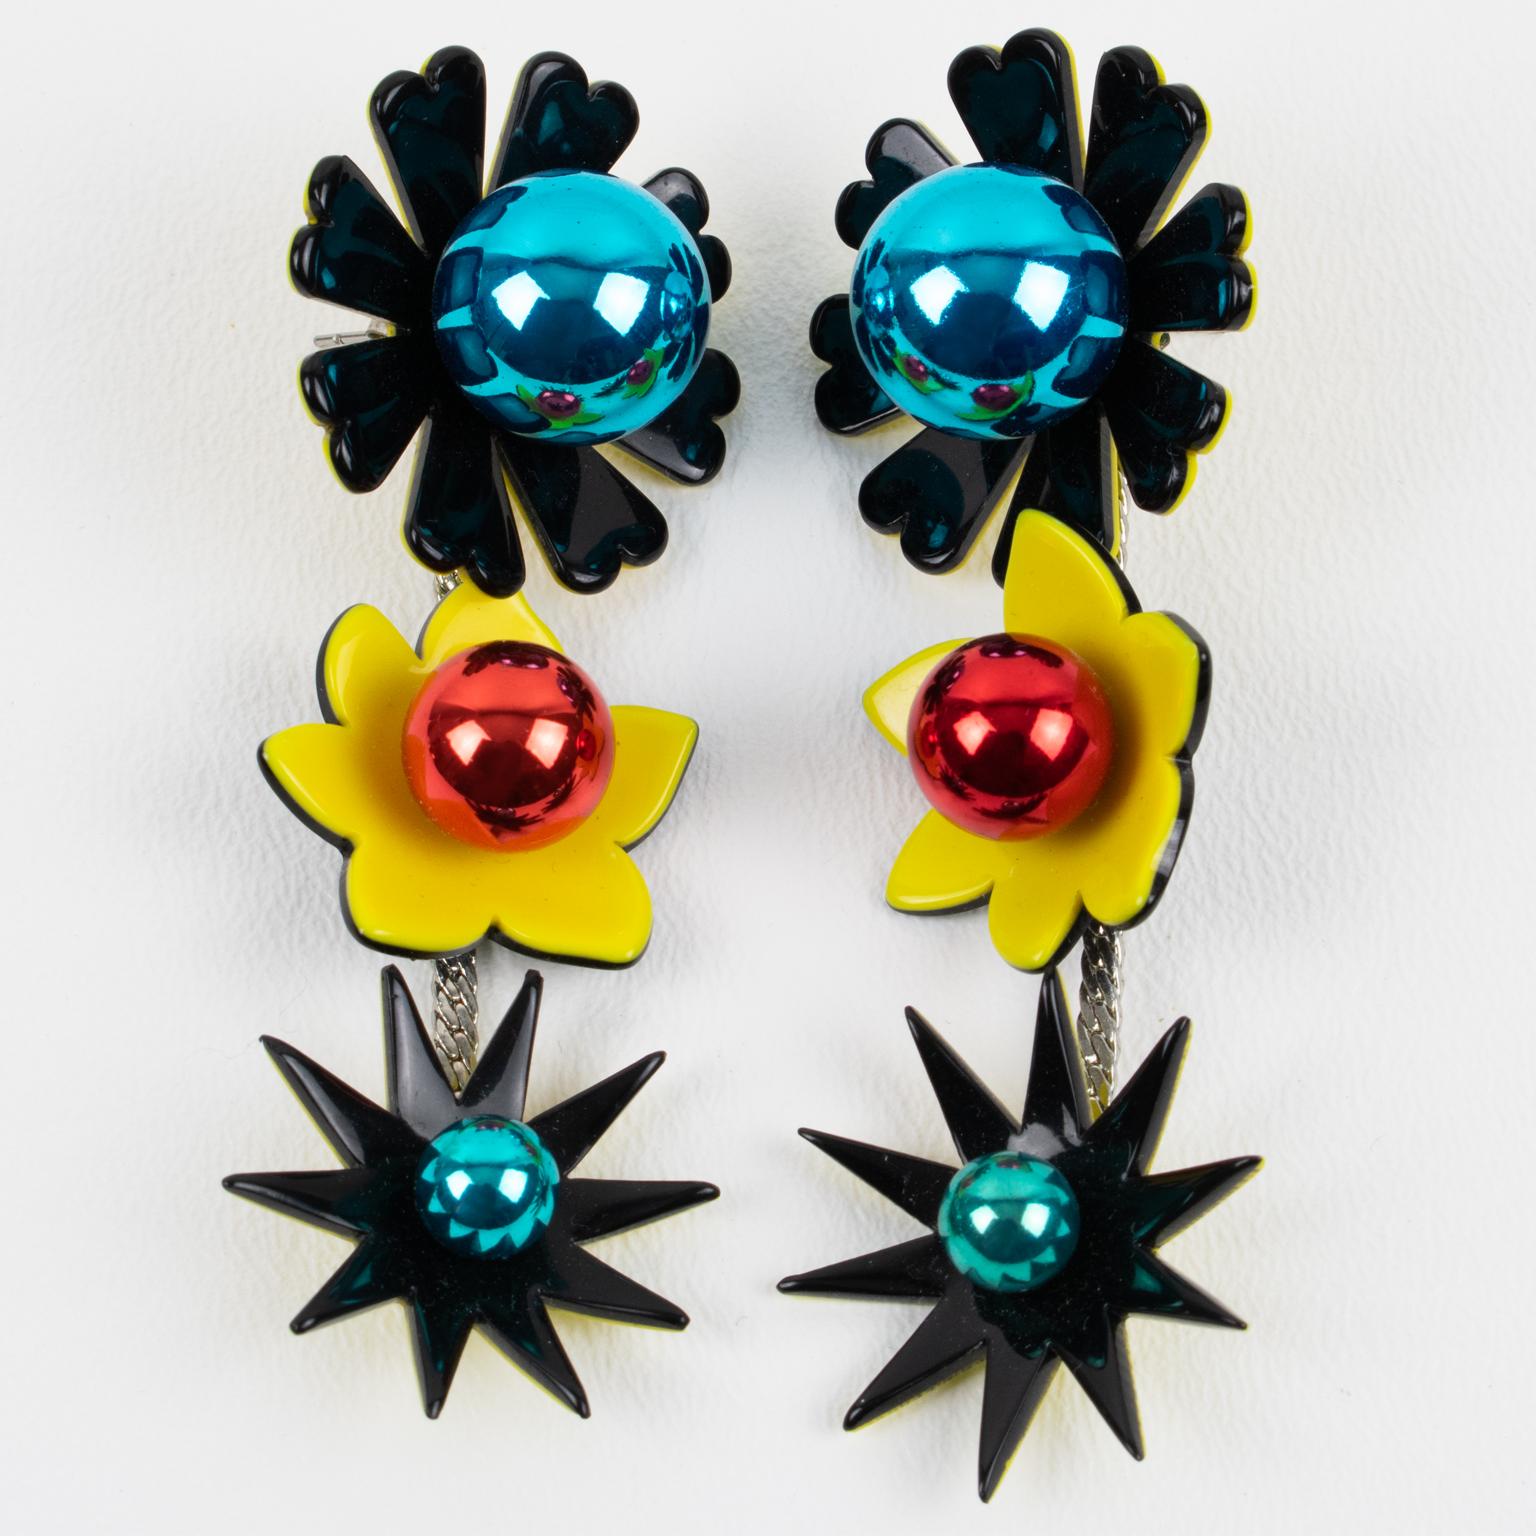 Romantic Kenzo Black and Yellow Resin Floral Pierced Earrings with Mirror Glass Beads For Sale